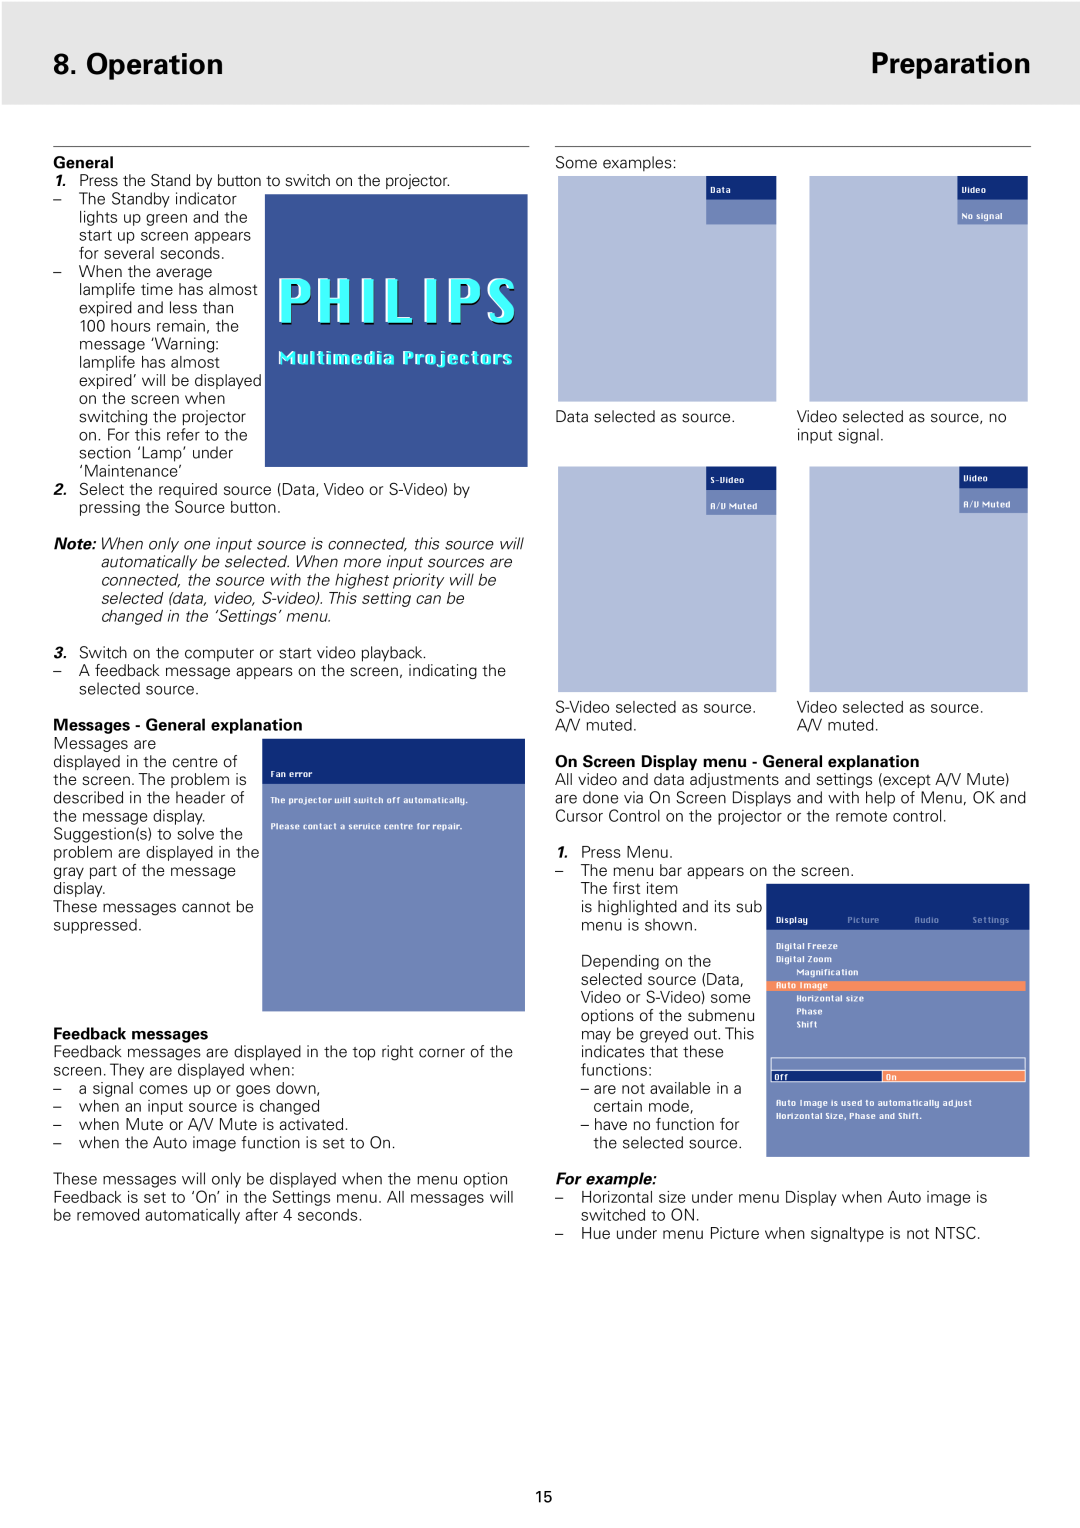 Philips 2 Series Operation, Preparation, Messages - General explanation, On Screen Display menu - General explanation 